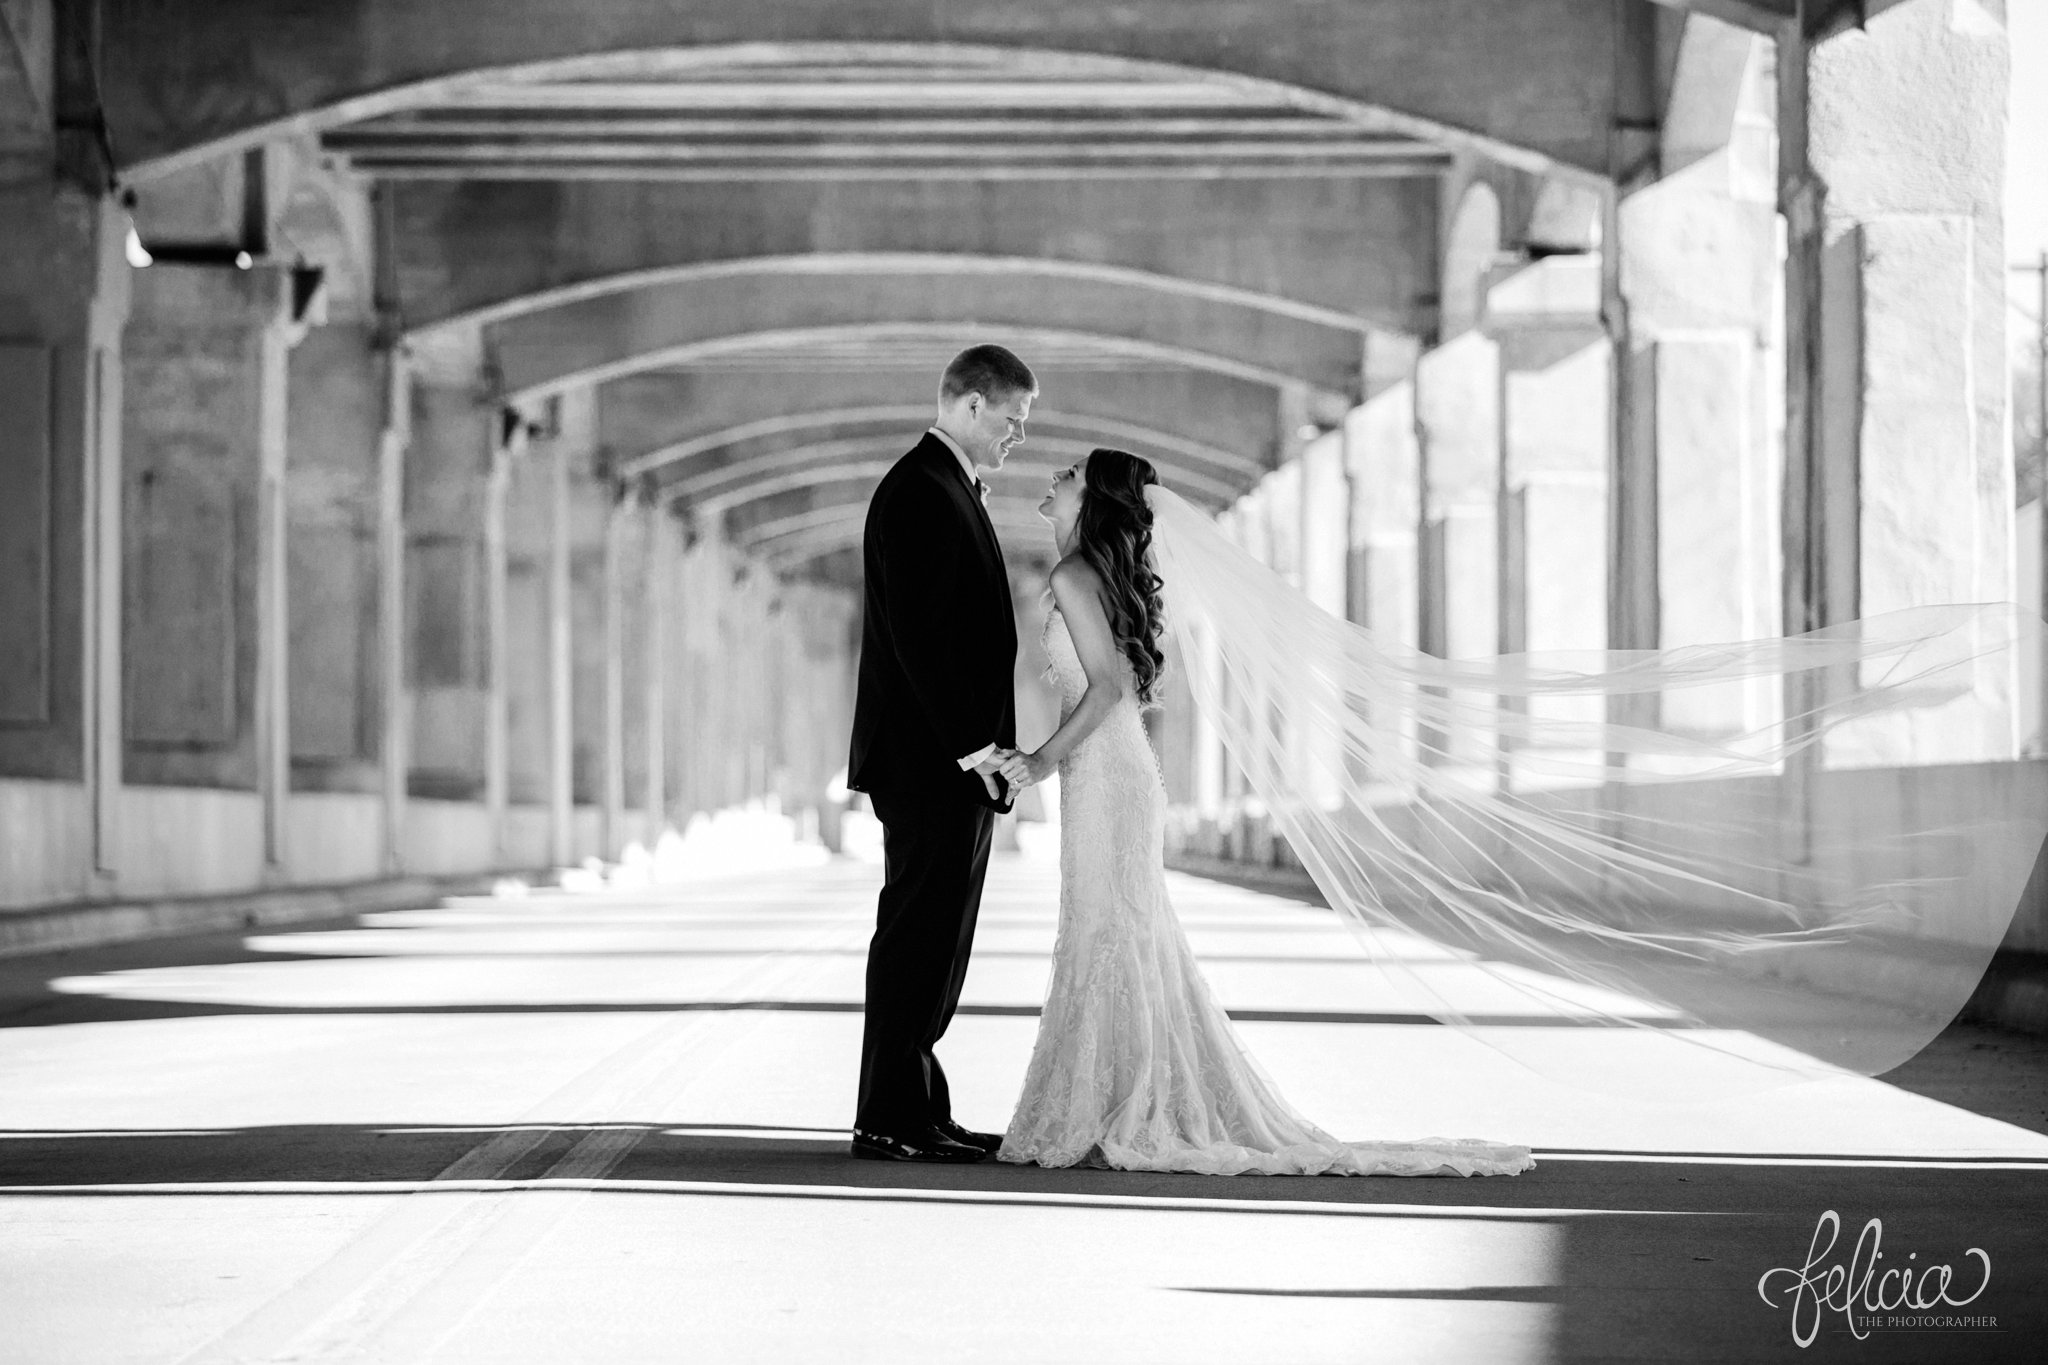 black and white | wedding | wedding photos | industrial | Rumely Event Space | wedding photography | images by feliciathephotographer.com | West Bottoms | first look | Maggie Sottero | bride and groom | industrial background | linking hands | candid | profile | flowing veil | dramatic | long veil 